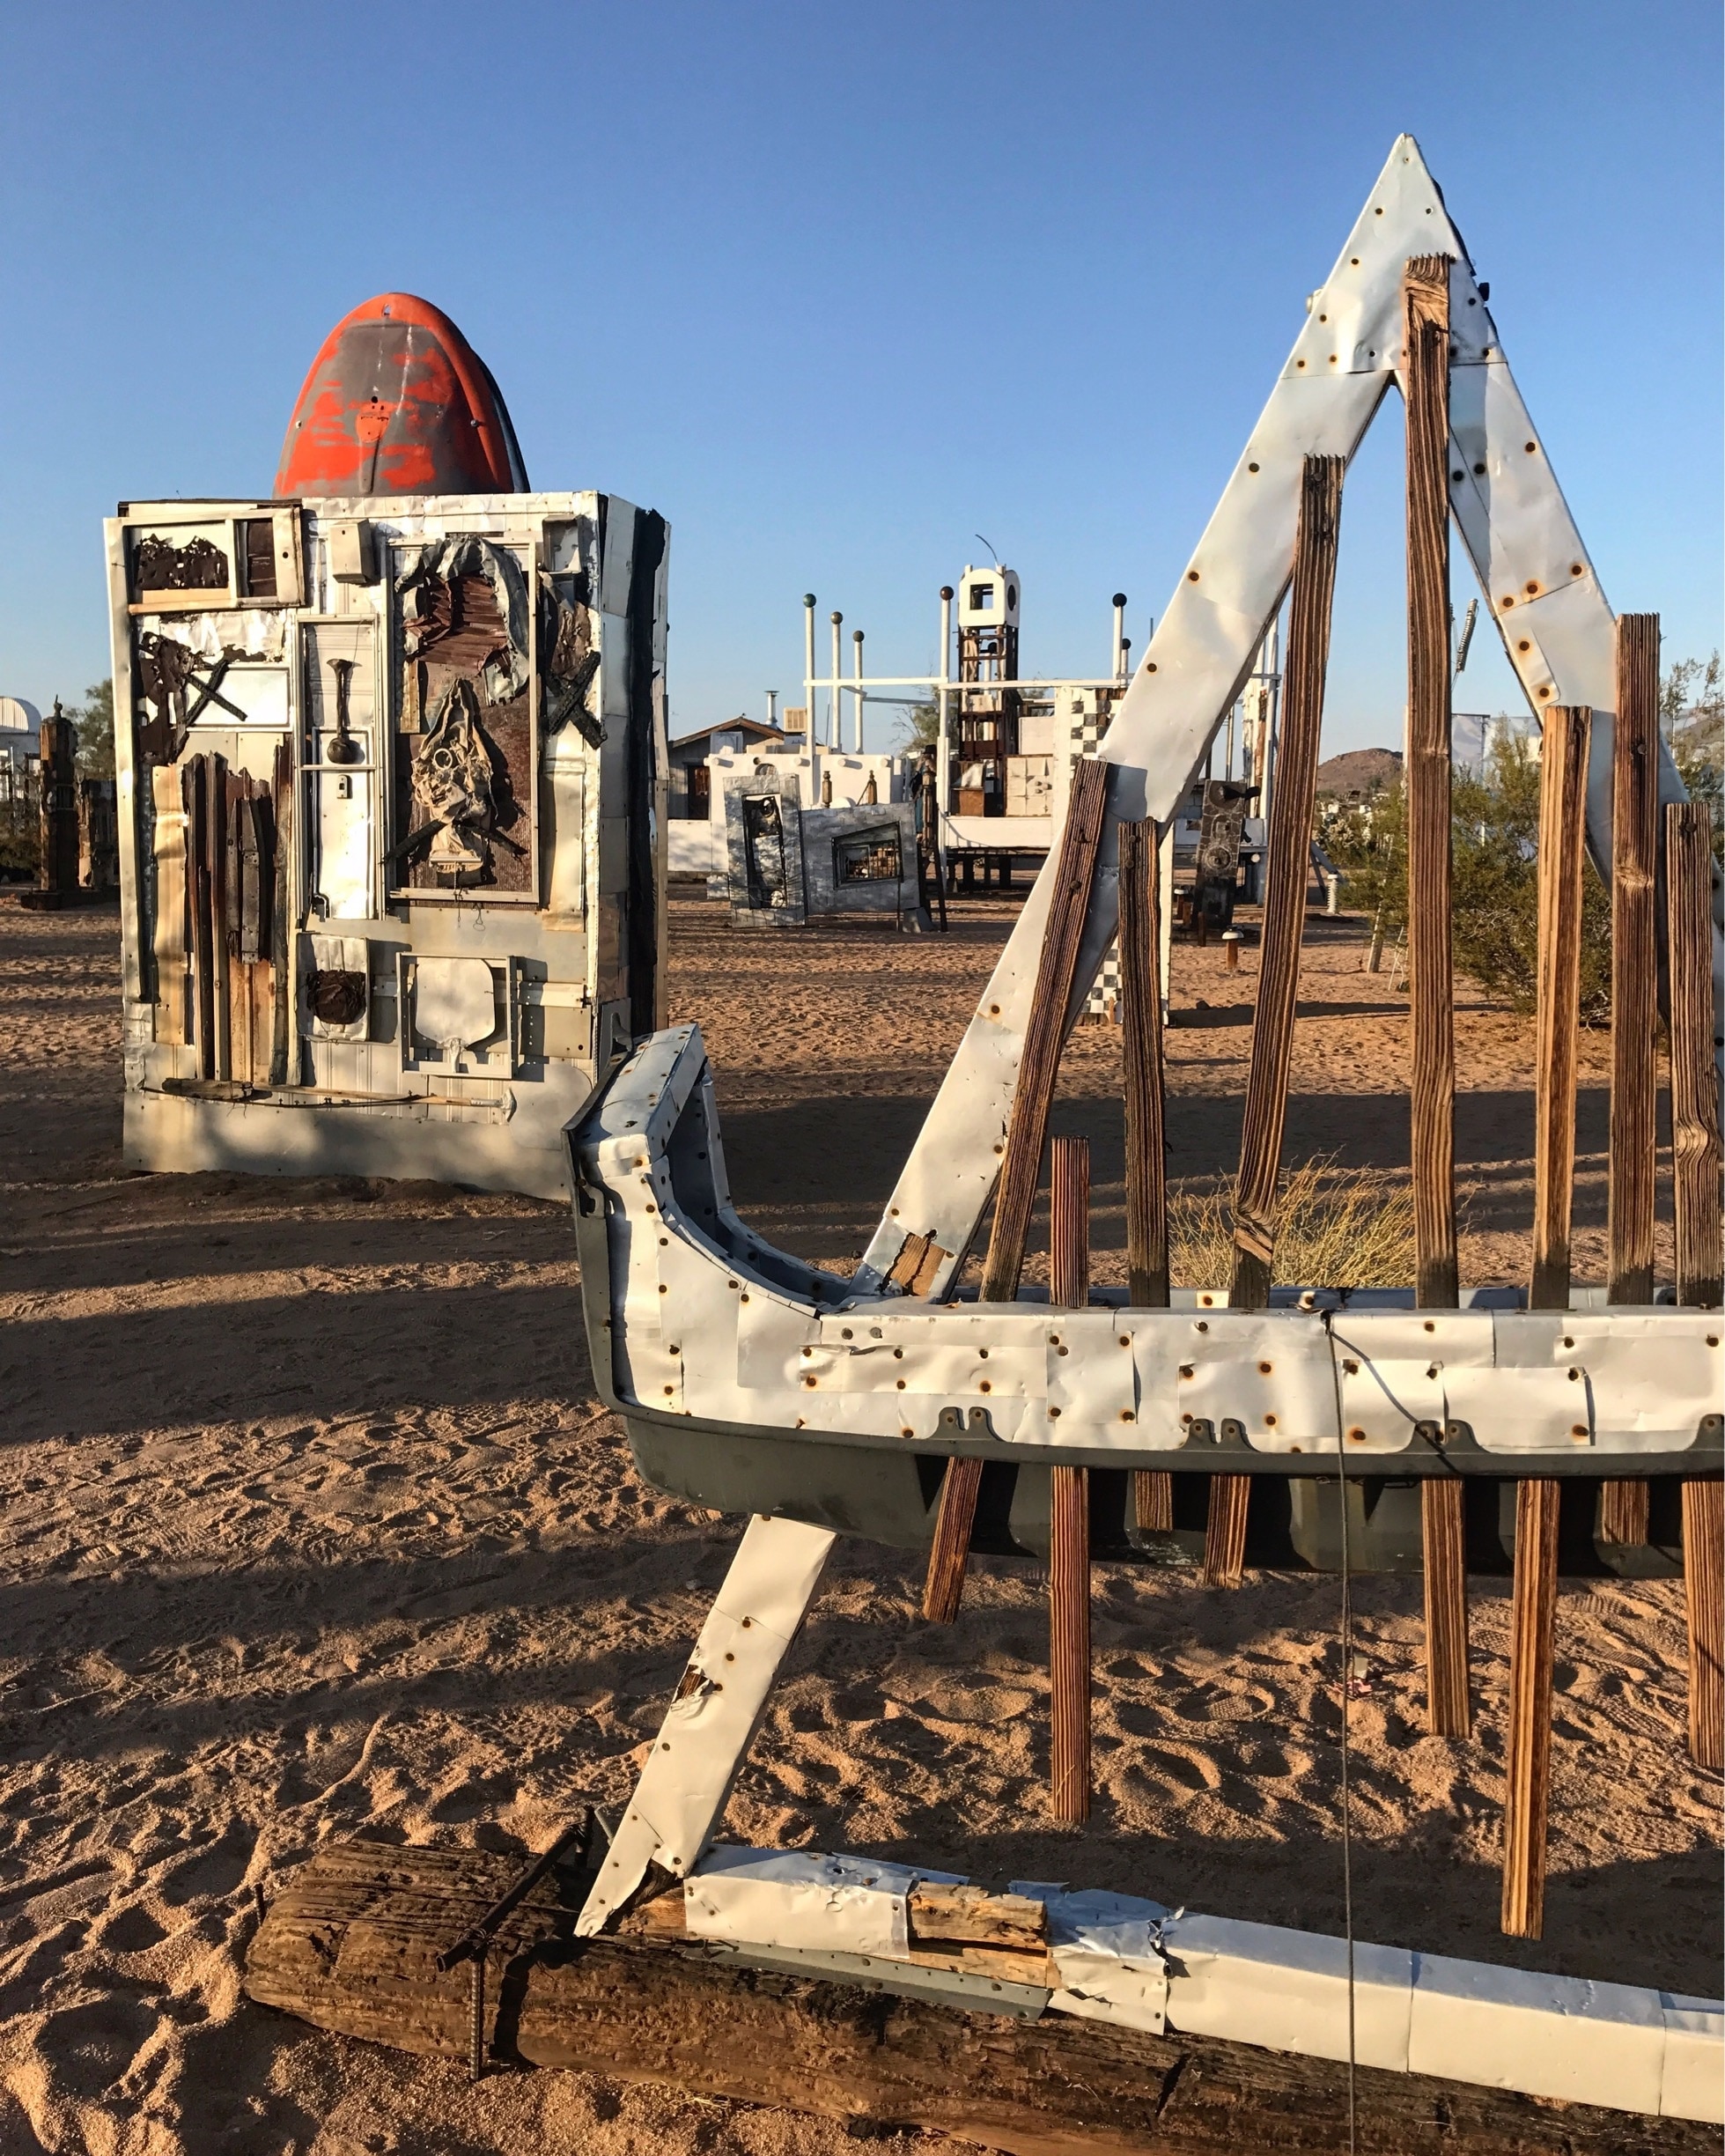 Junk turned to art on this desert lot, about 10 minutes or so from Joshua Tree Park. No entrance fees. Plenty of fun to explore. 
#Details 